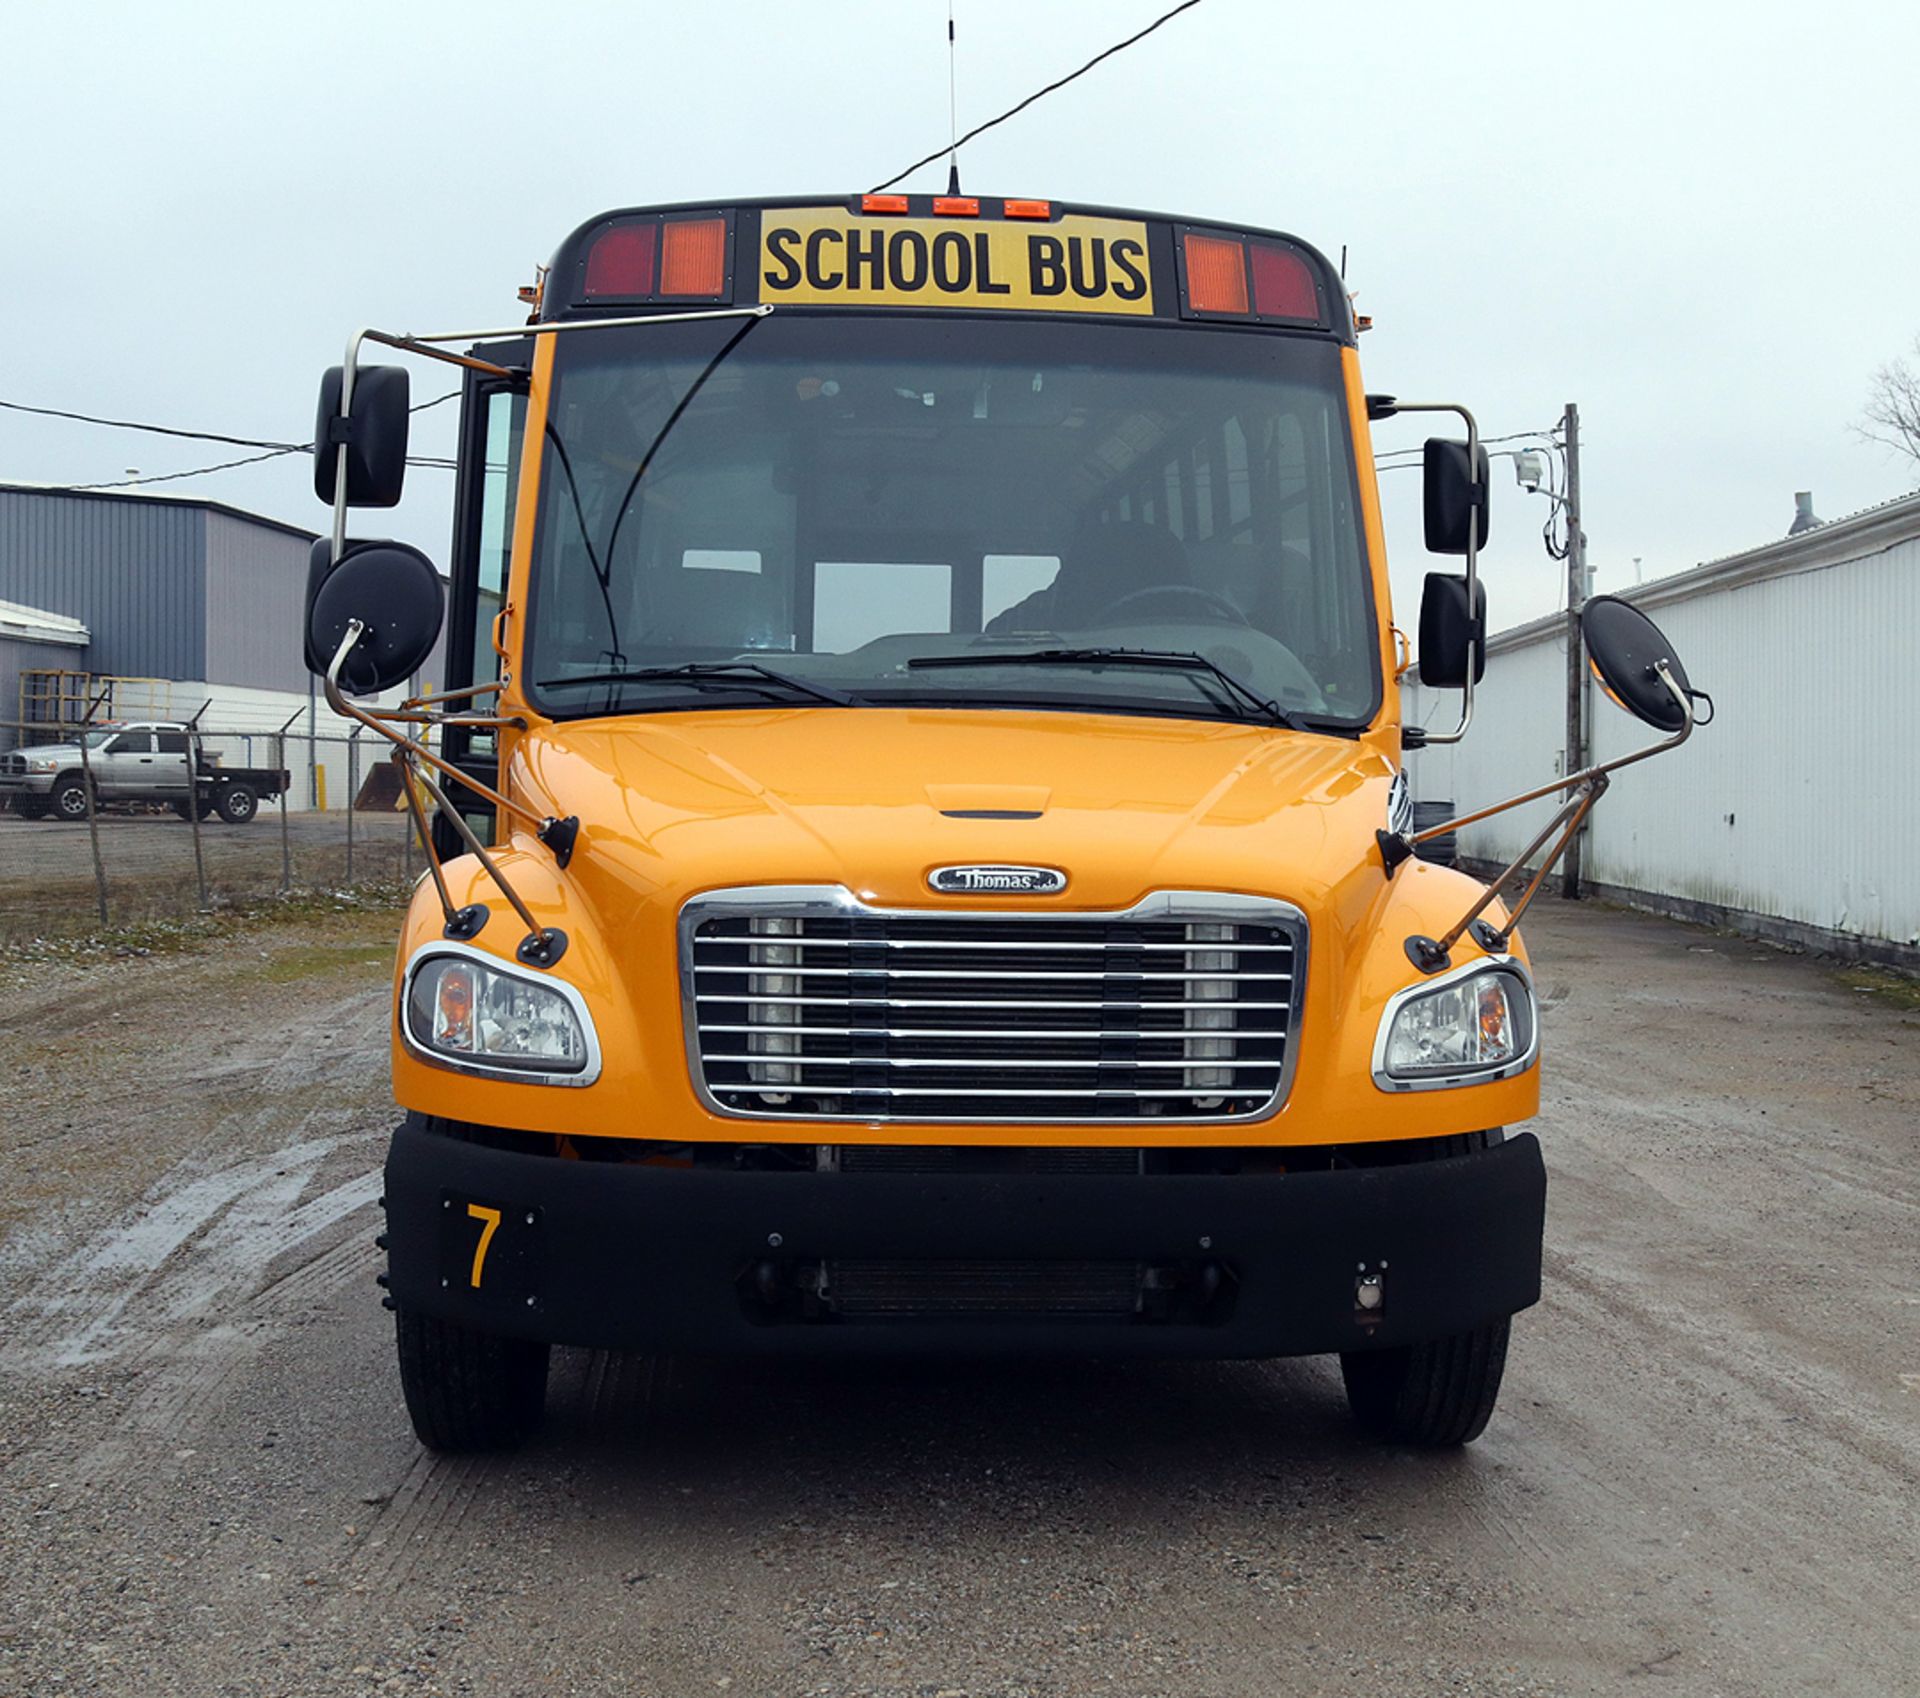 2011 Thomas C2 Saf-T-Liner School Bus on Freightliner Chassis with Braun Handicap Lift, 215,496 mile - Image 2 of 16